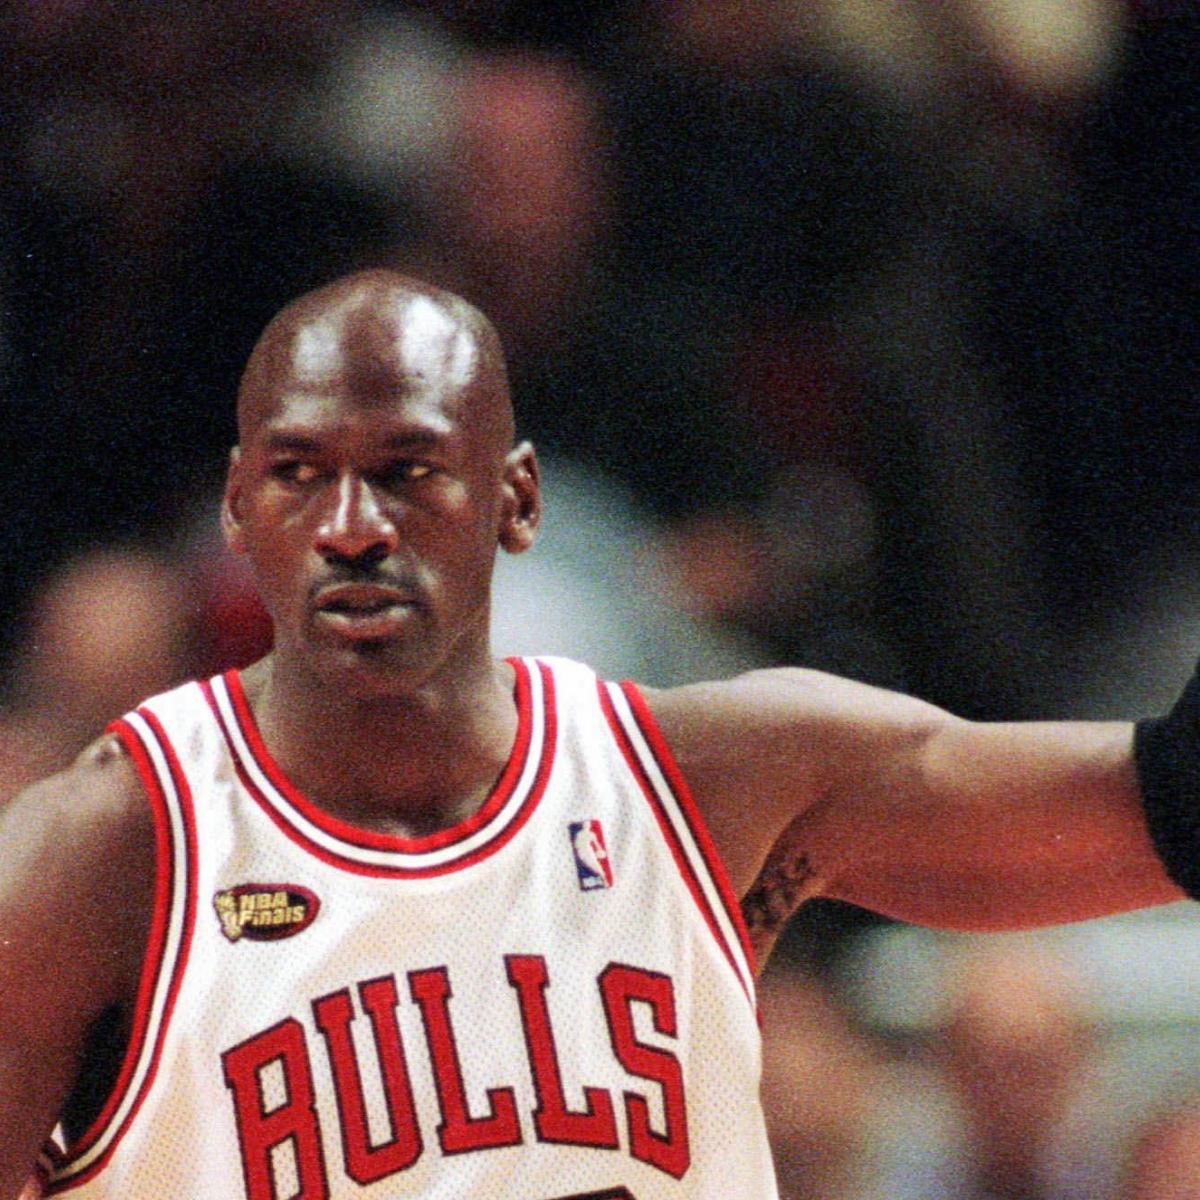 Bleacher Report on X: 26 years ago today: MJ sent the fax. 🐐 I